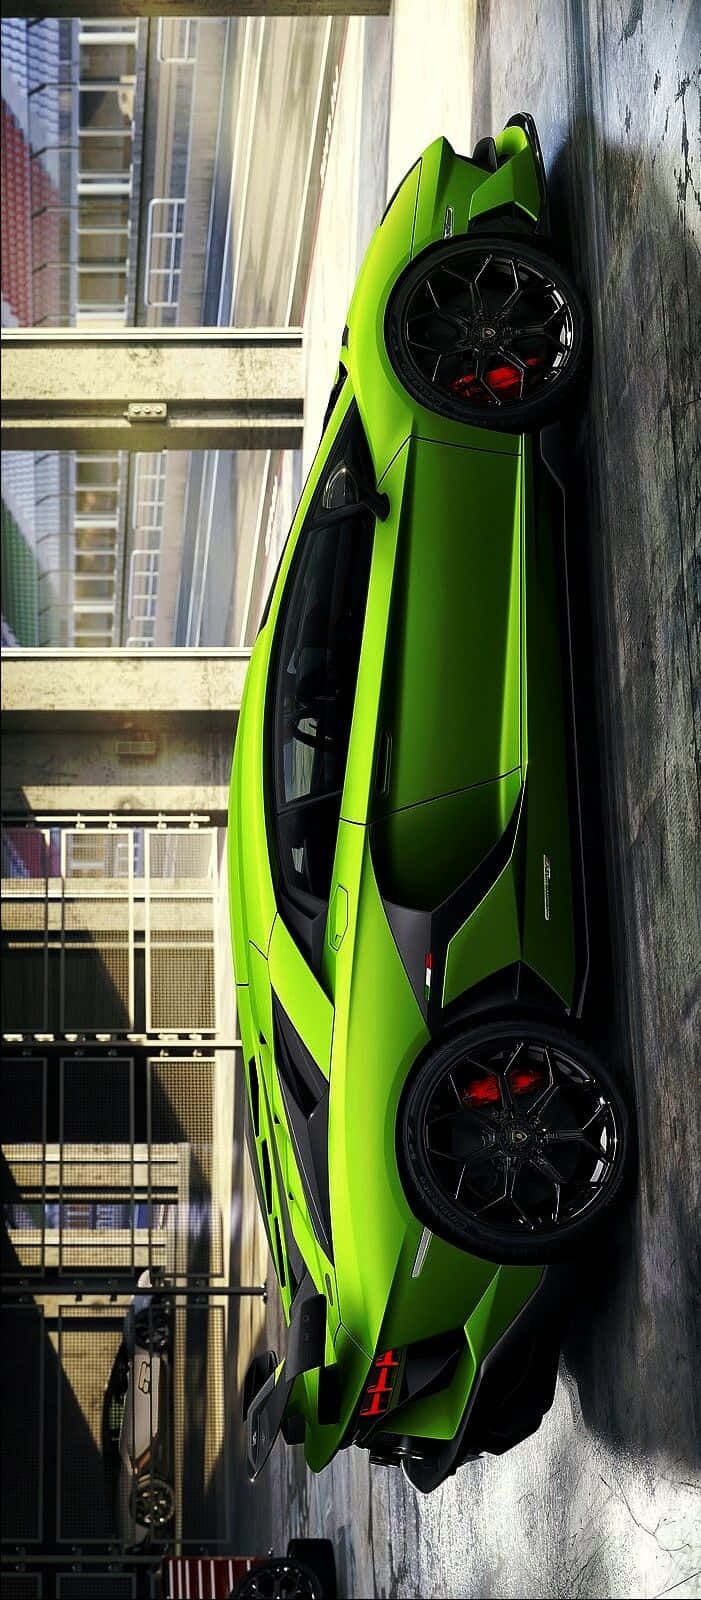 A Green Sports Car Is Parked In A Garage